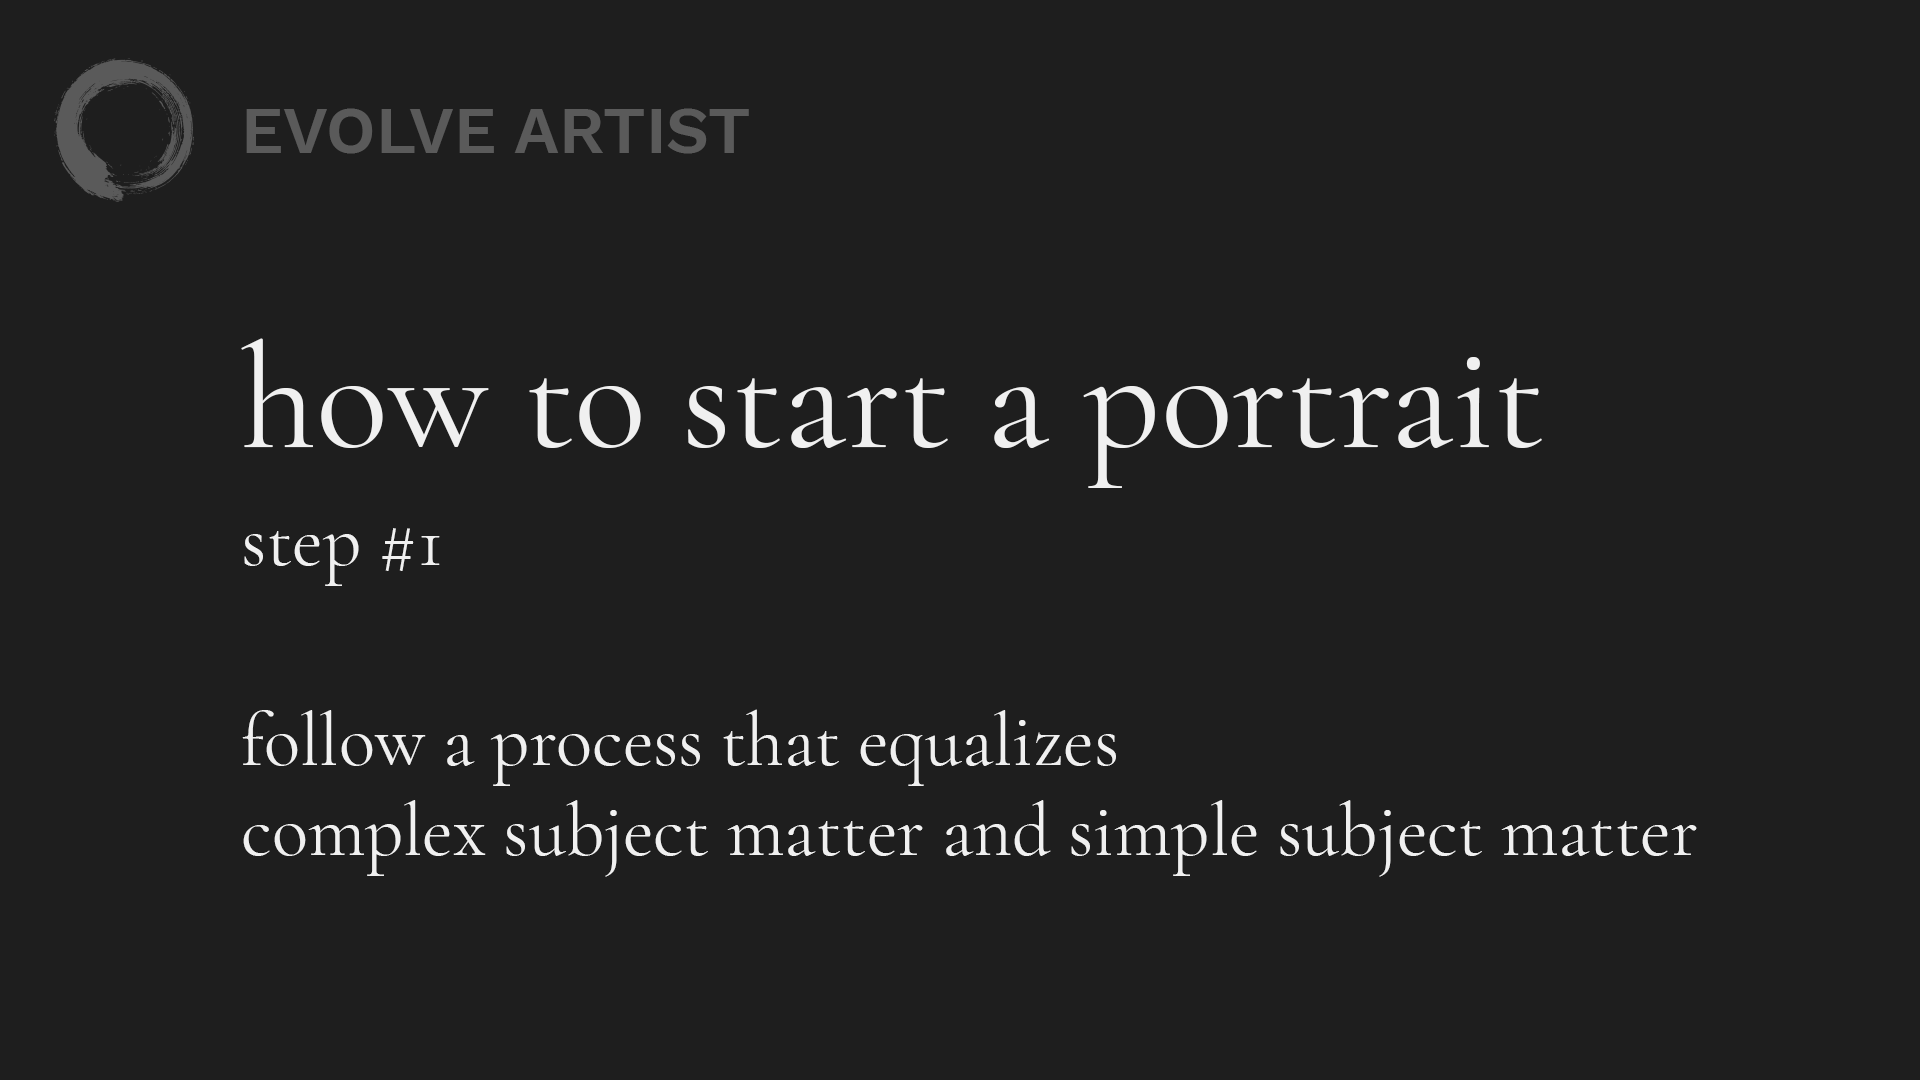 How to Start a Portrait Step #1: Follow a process that equalizes complex subject matter and simple subject matter. 